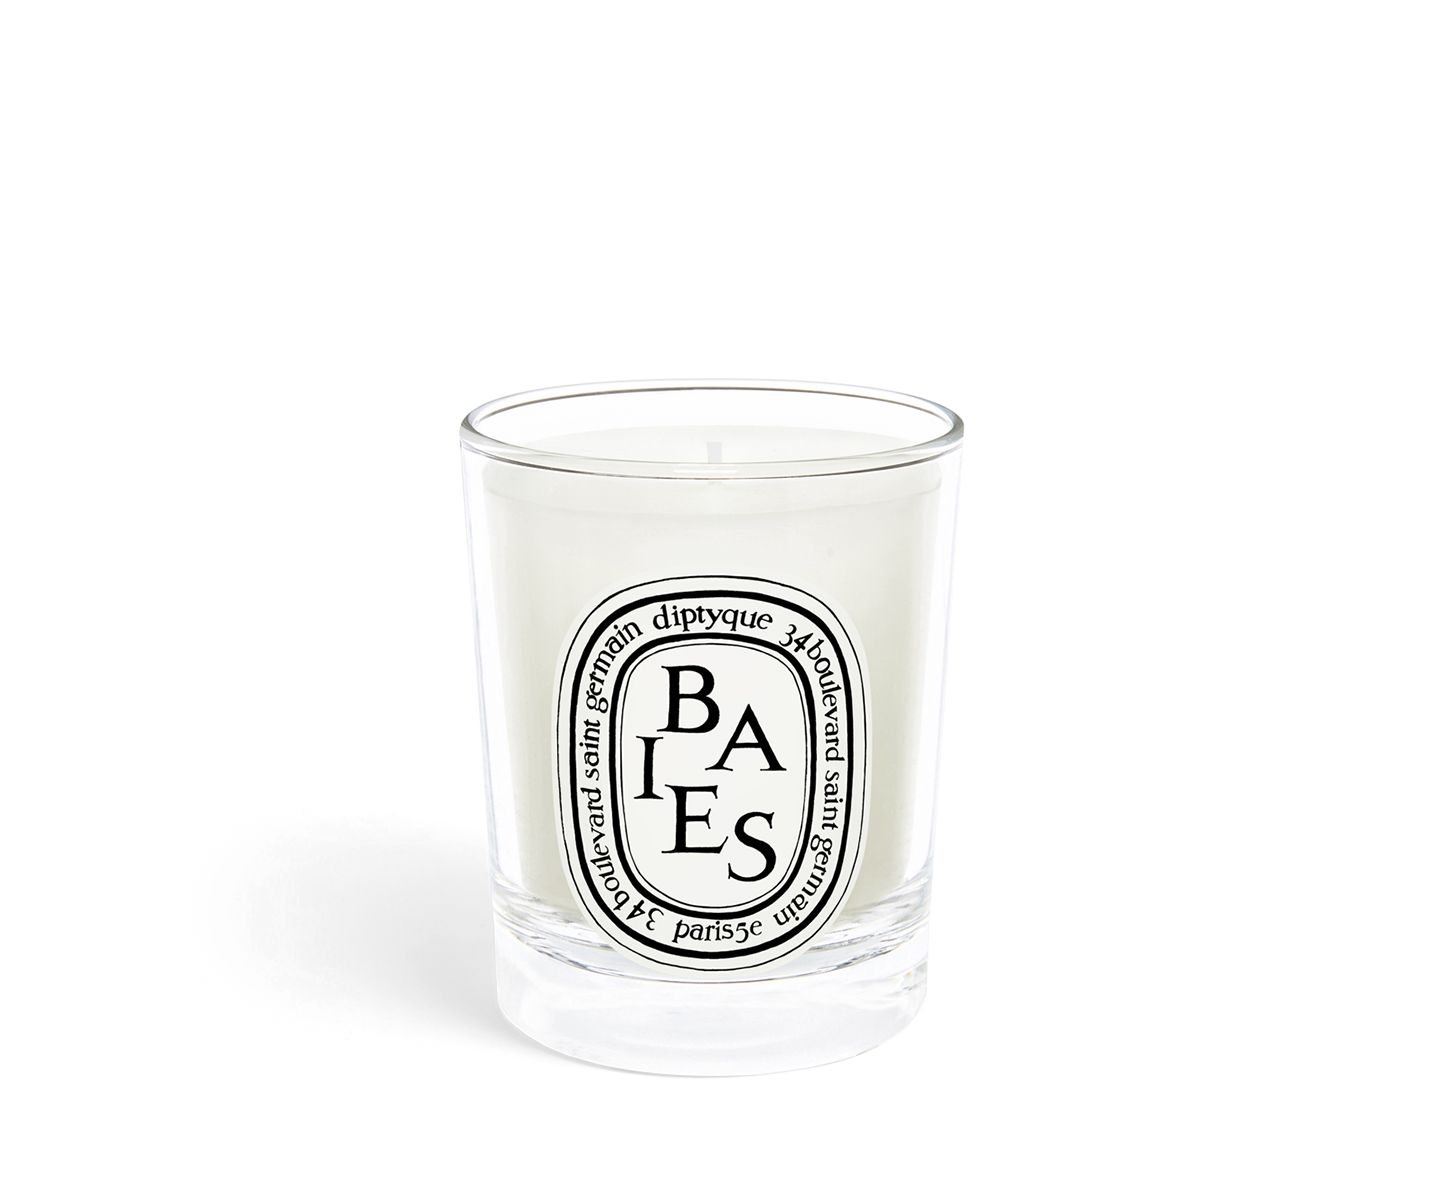 Baies / Berries Small Candle | Diptyque (UK)